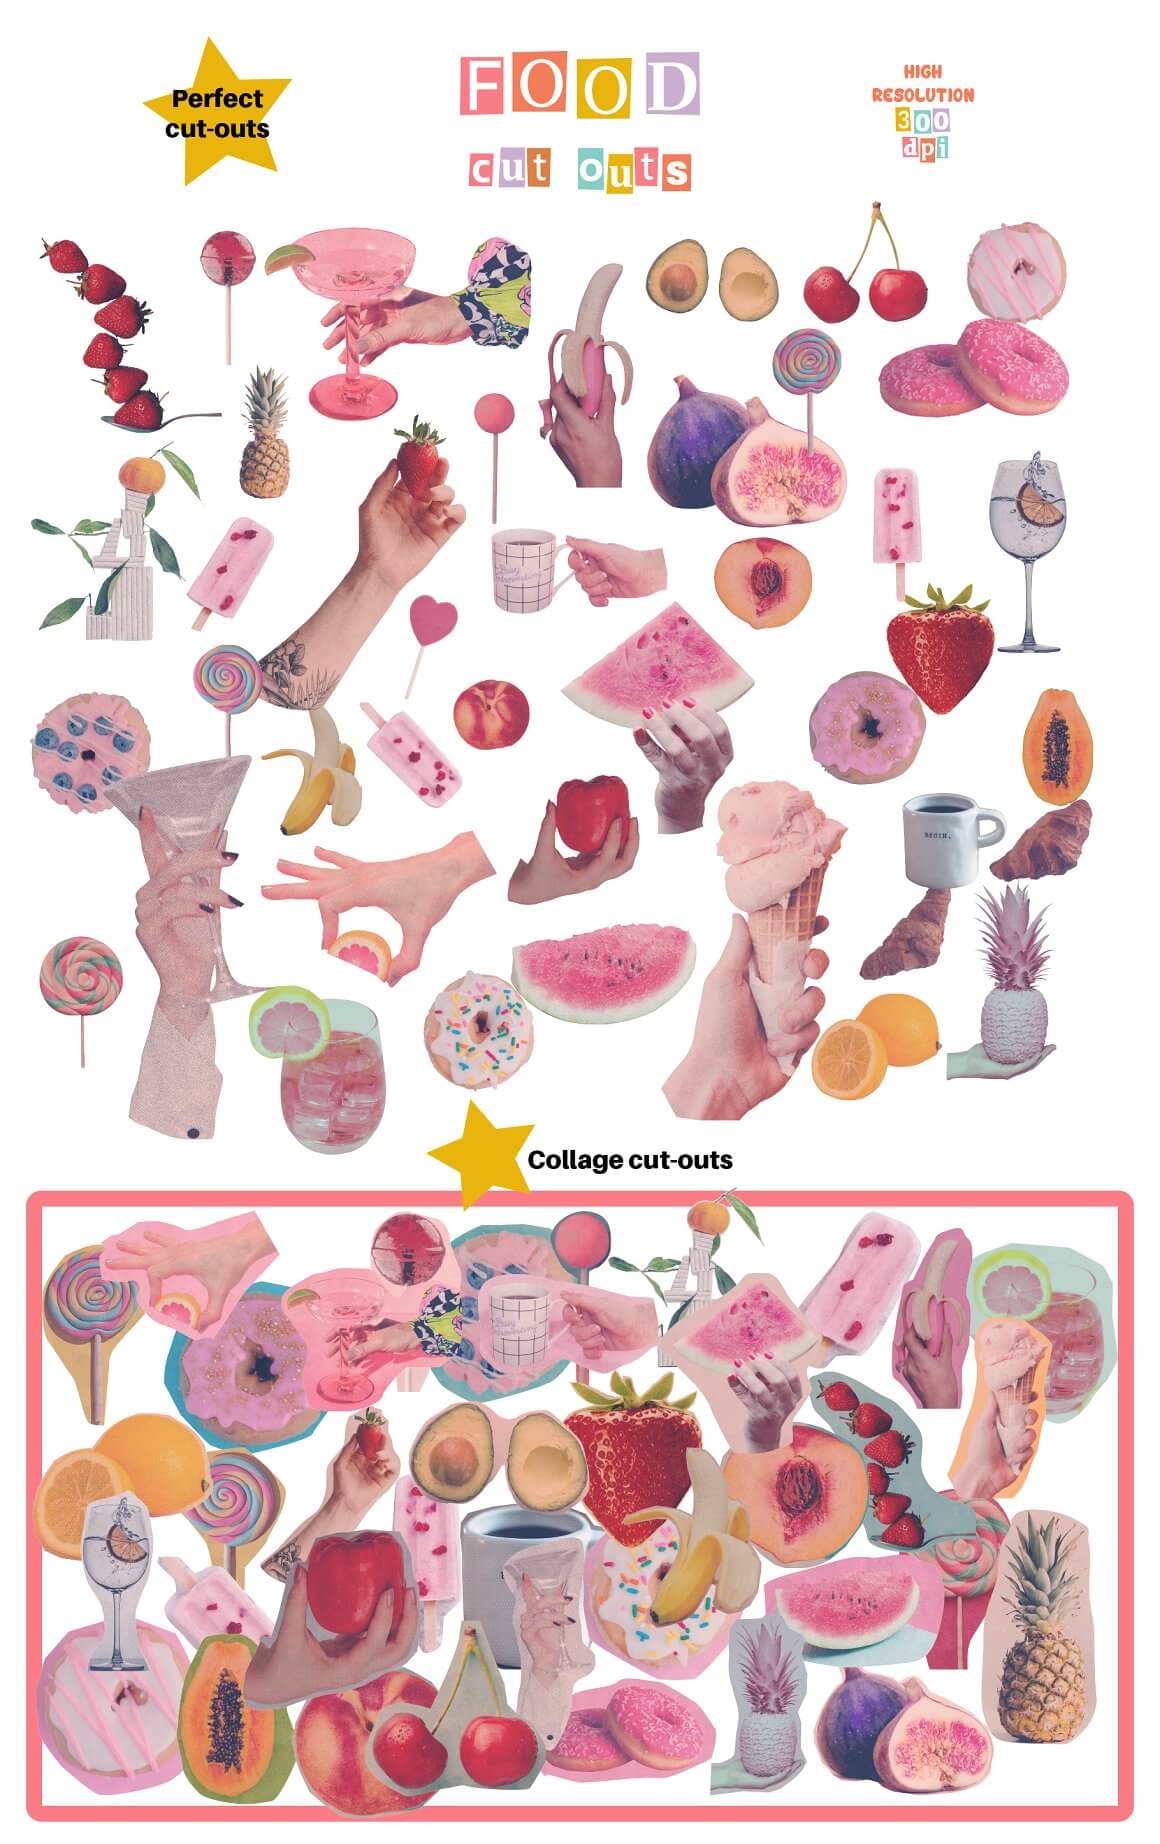 Food Collage Cut-outs.